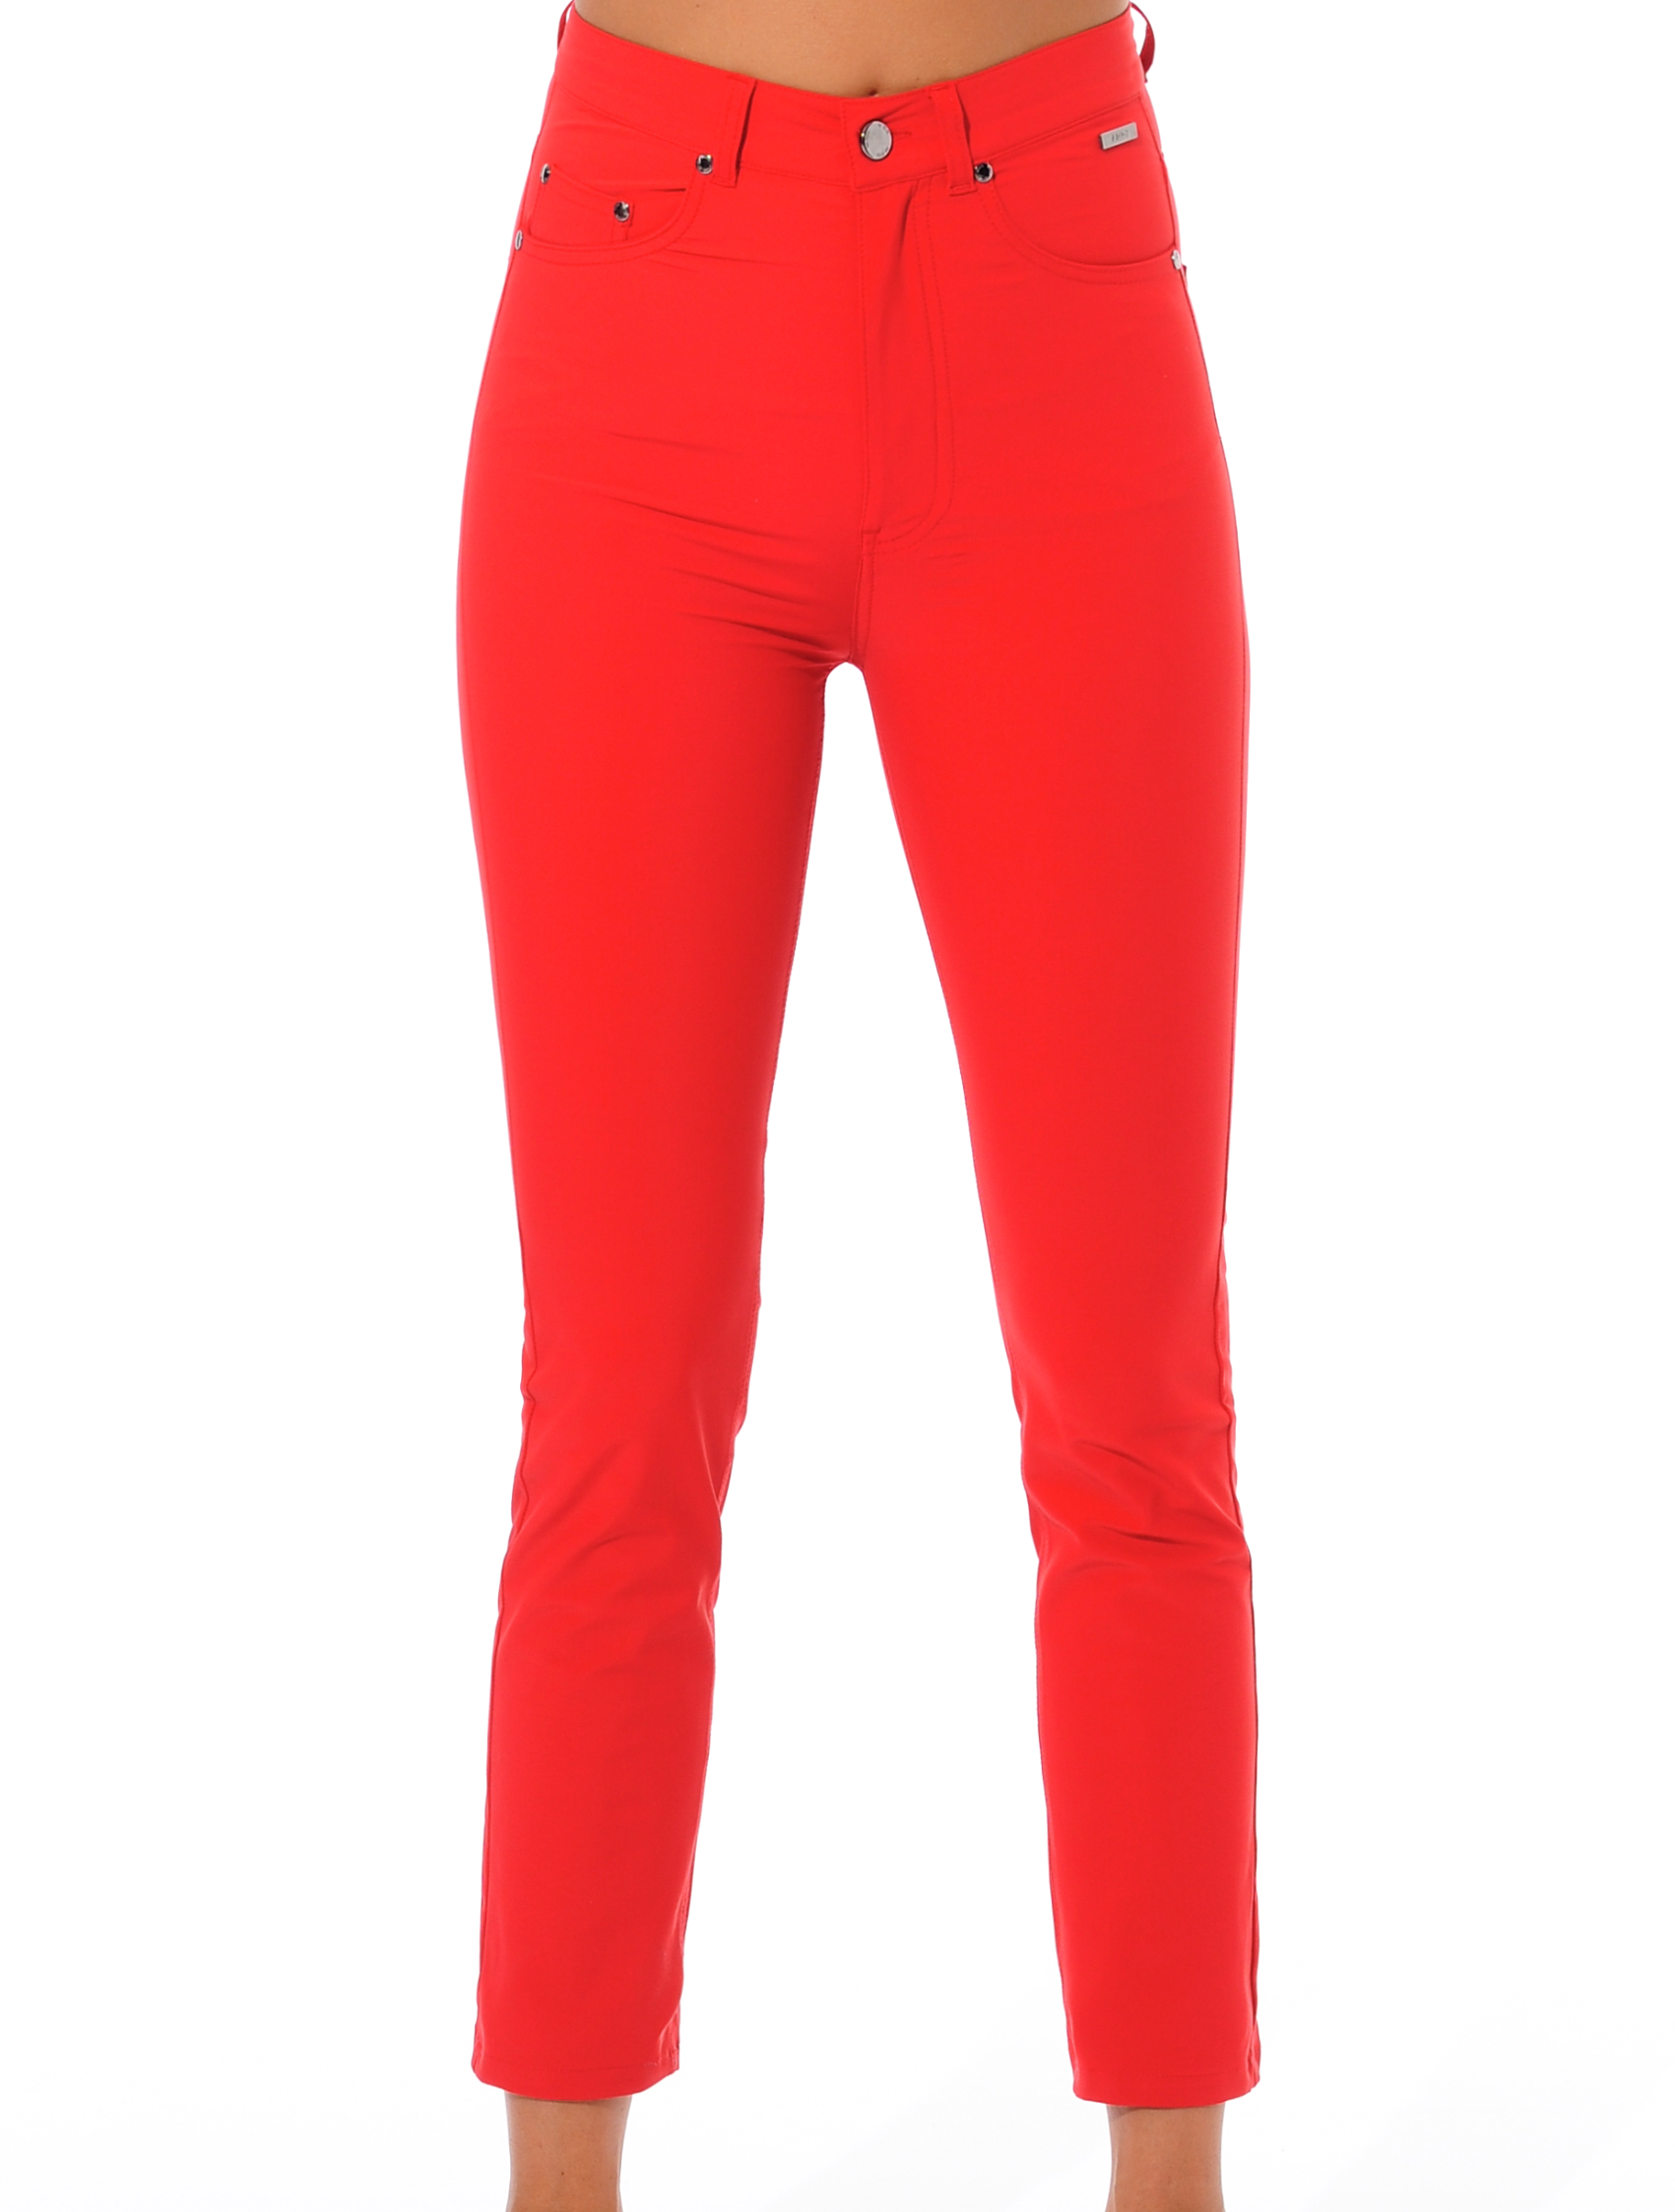 4way stretch high waist cropped pants red 